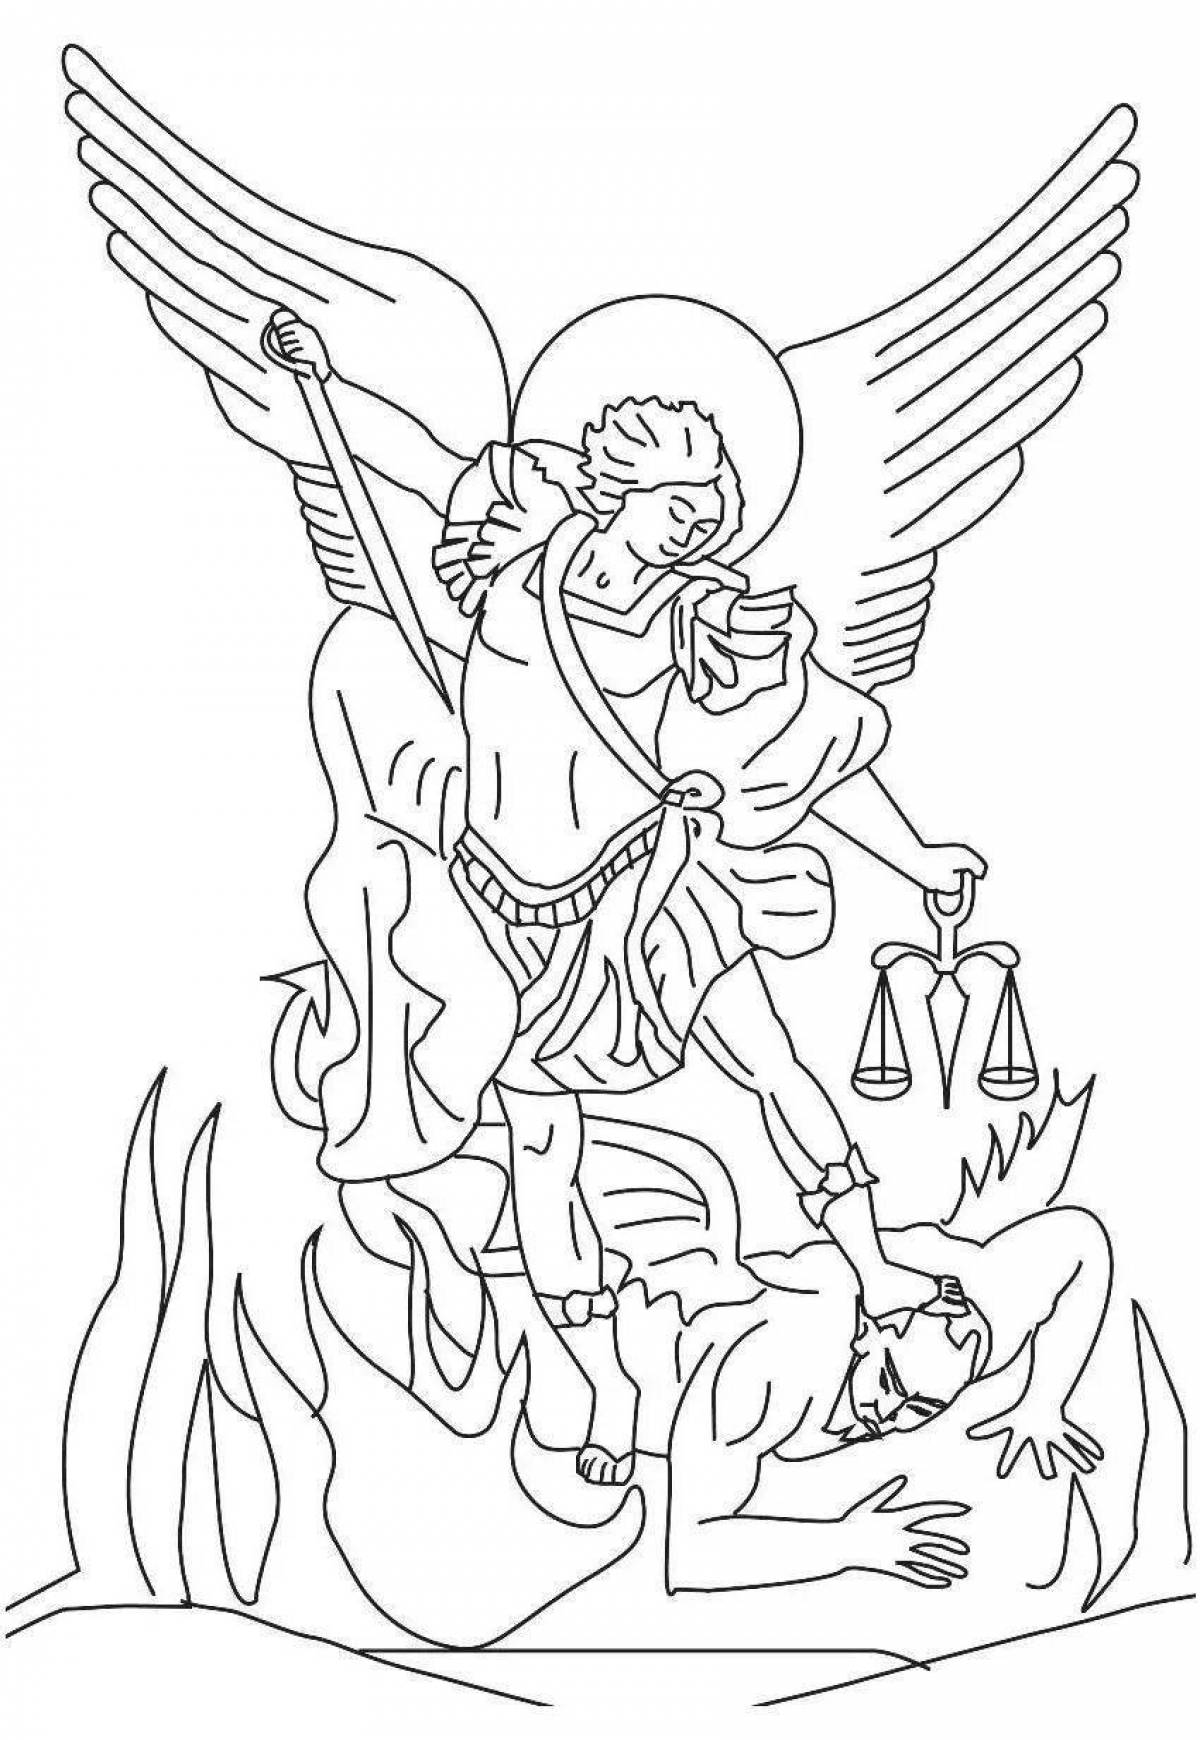 Coloring book the great archangel michael